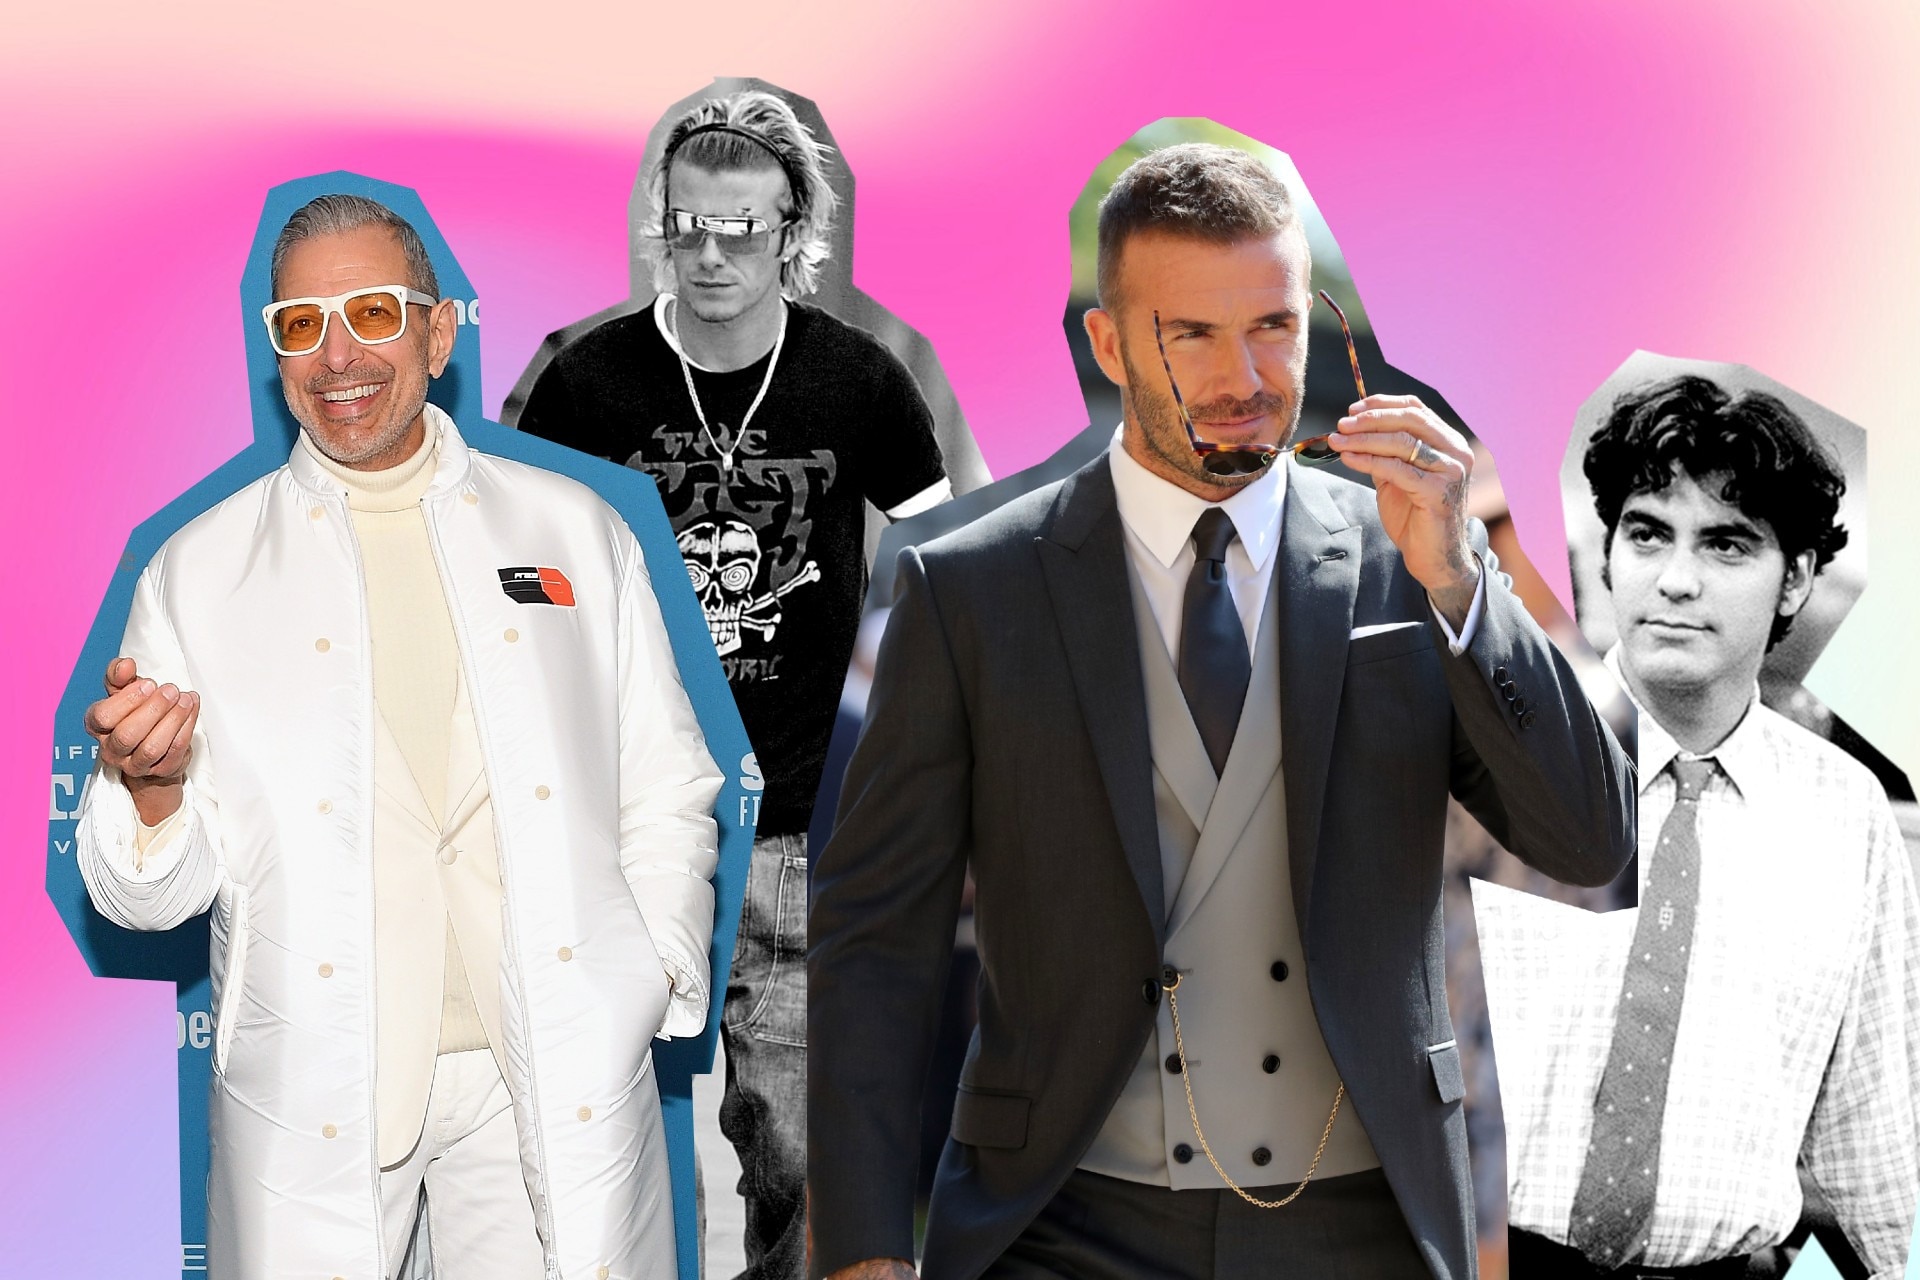 David Beckham's Style Evolution Is Something To Behold